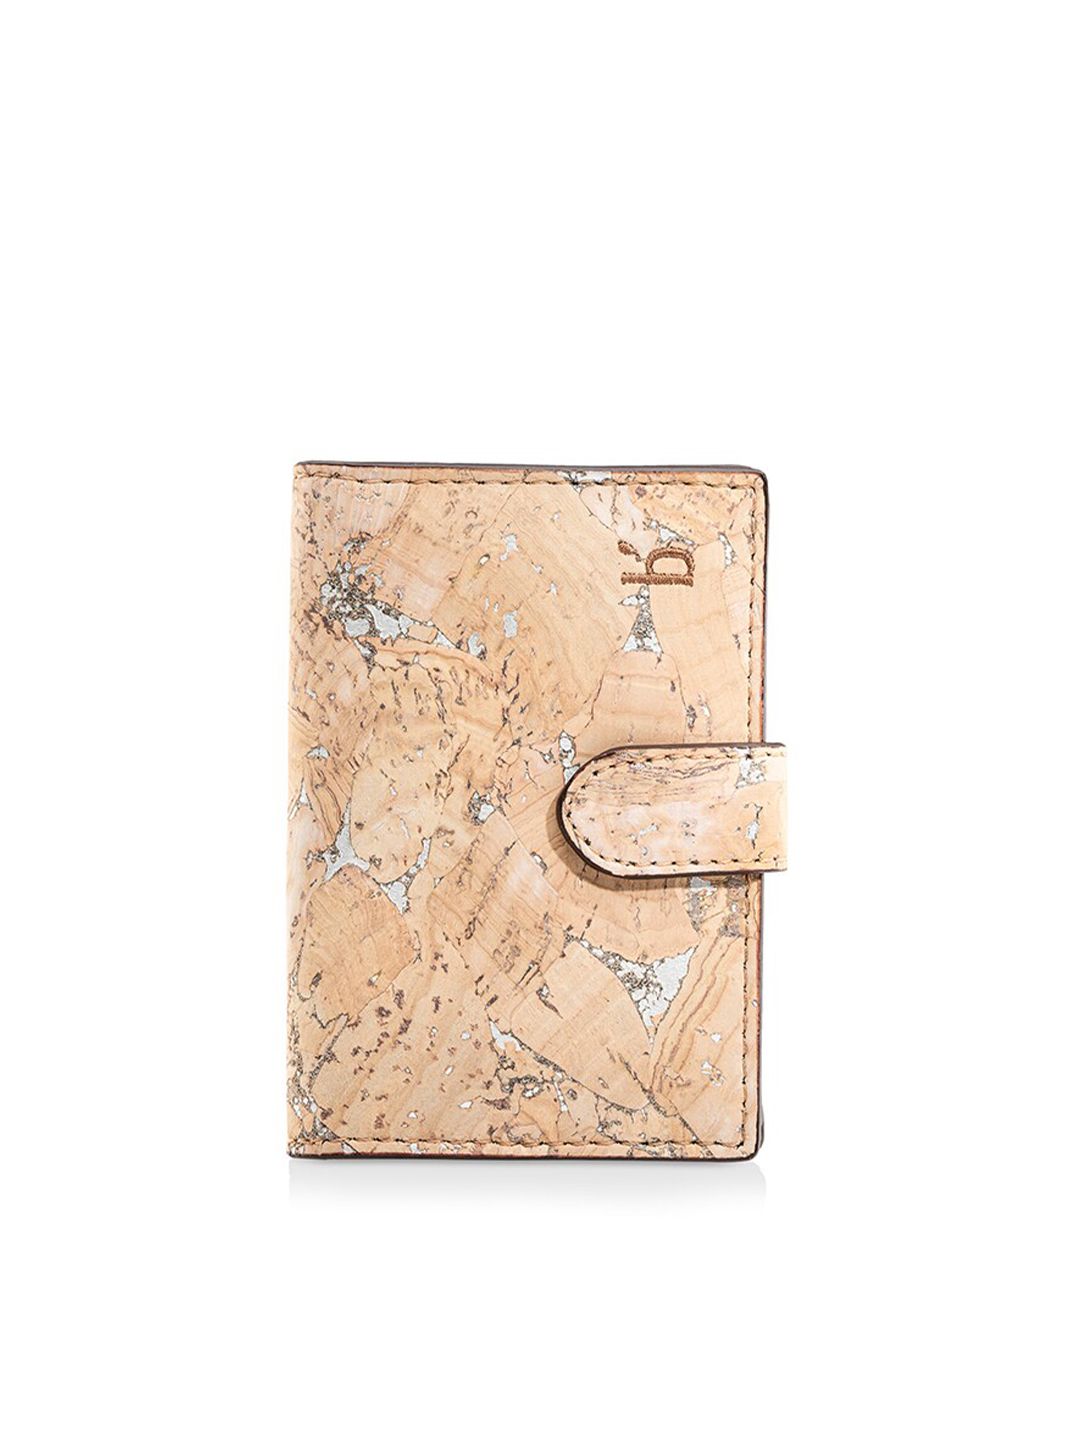 Beej Unisex Cream-Coloured Textured Two Fold Wallet Price in India